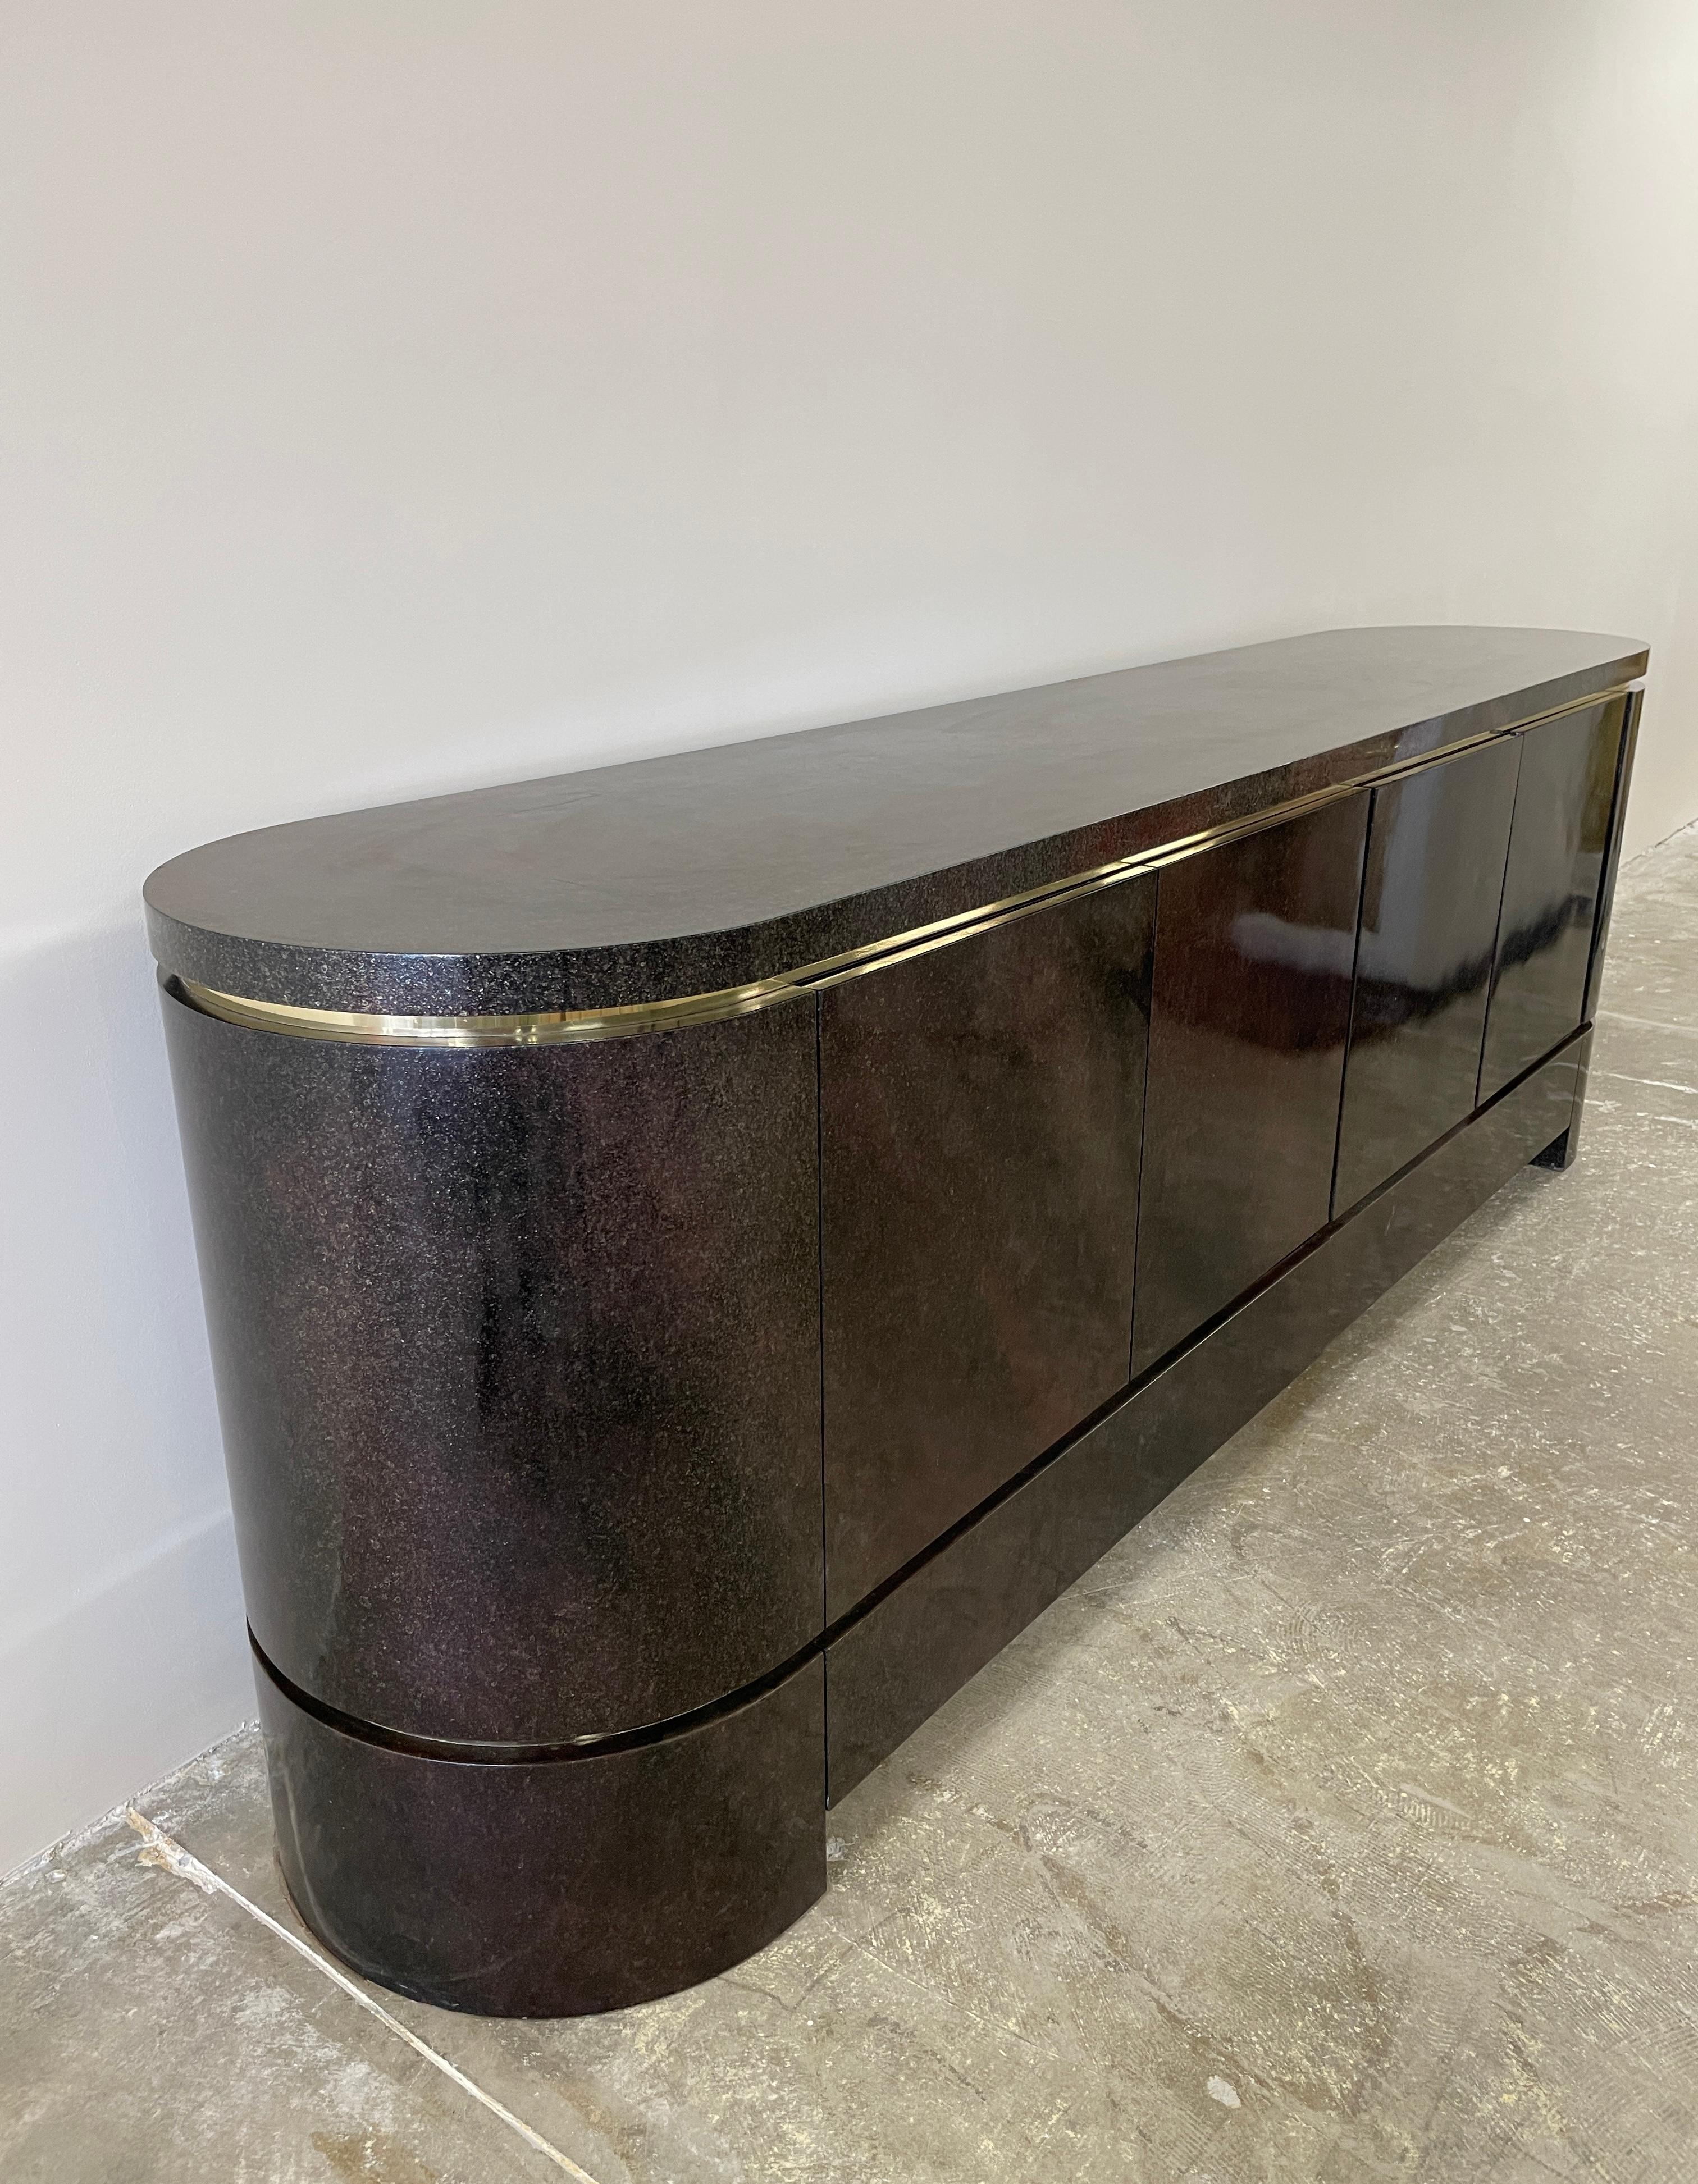 Italian Vintage 70's Lacquered and Brass Sideboard Credenza by Aldo Tura for Leonardo  For Sale